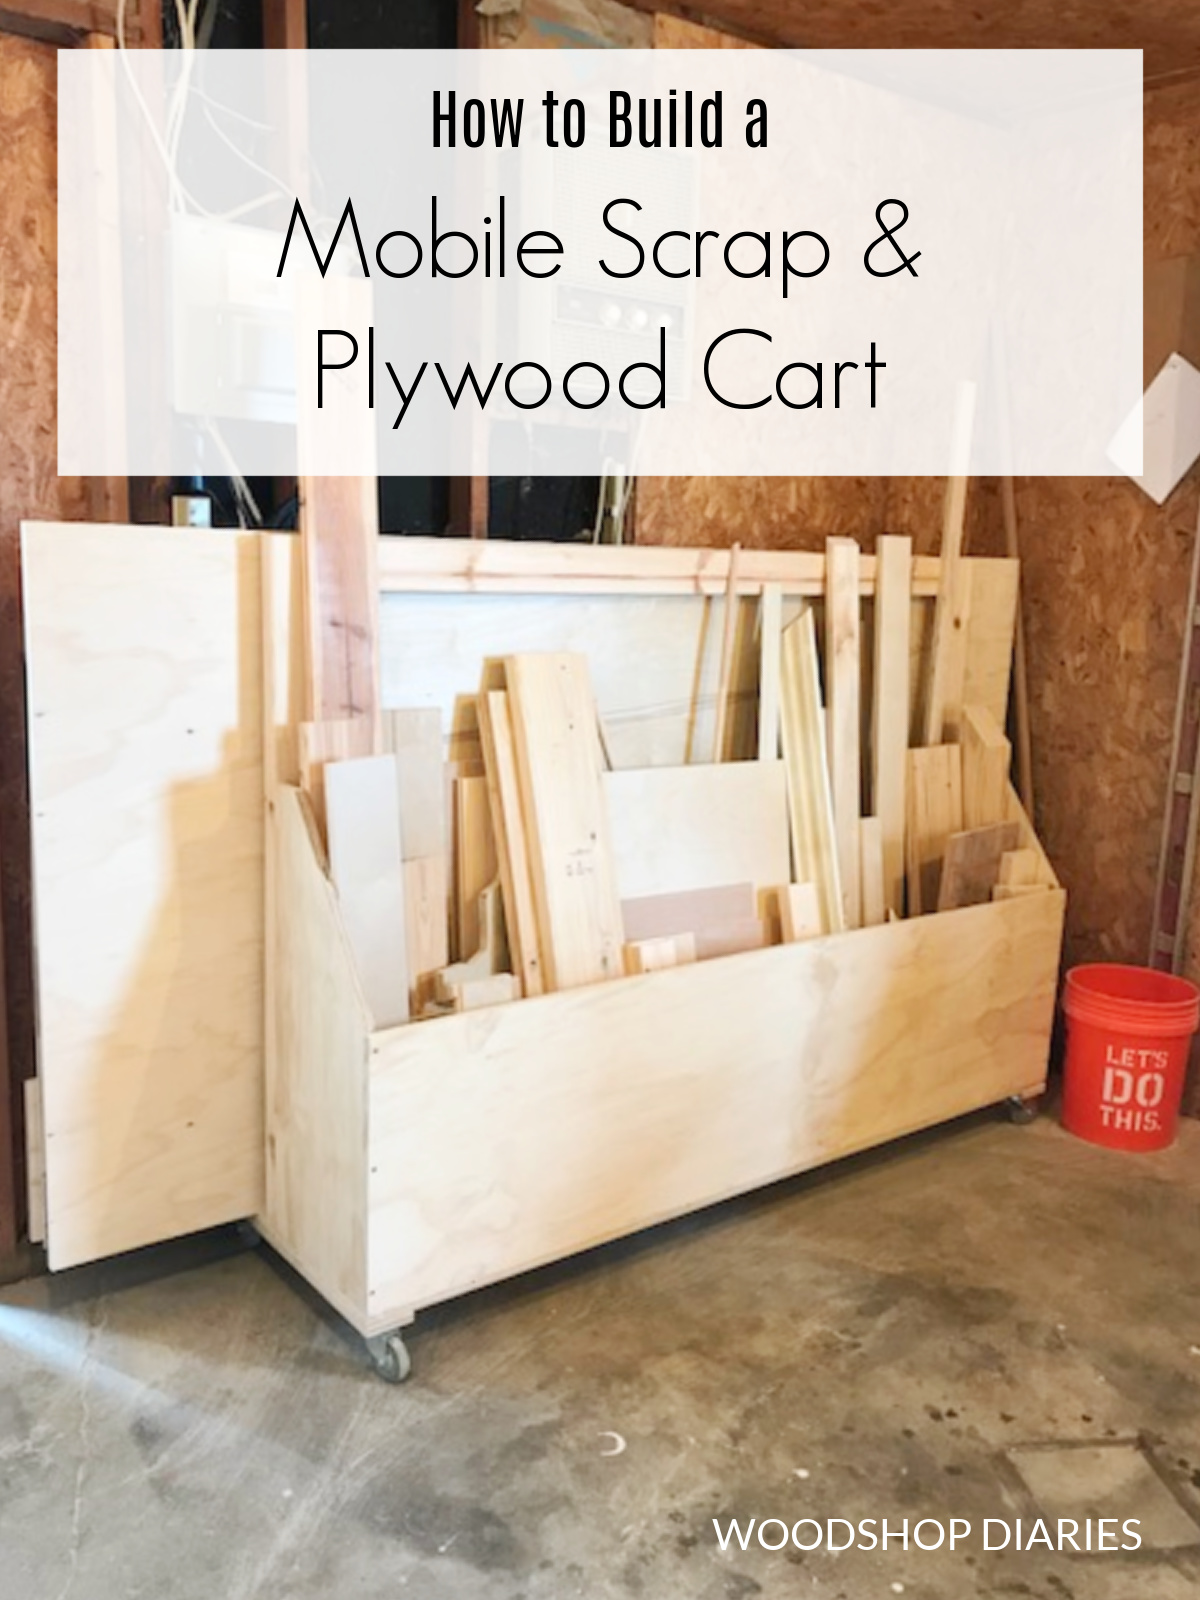 Mobile scrap wood and plywood storage cart loaded with lumber in workshop with text "how to build a mobile scrap and plywood cart" at top